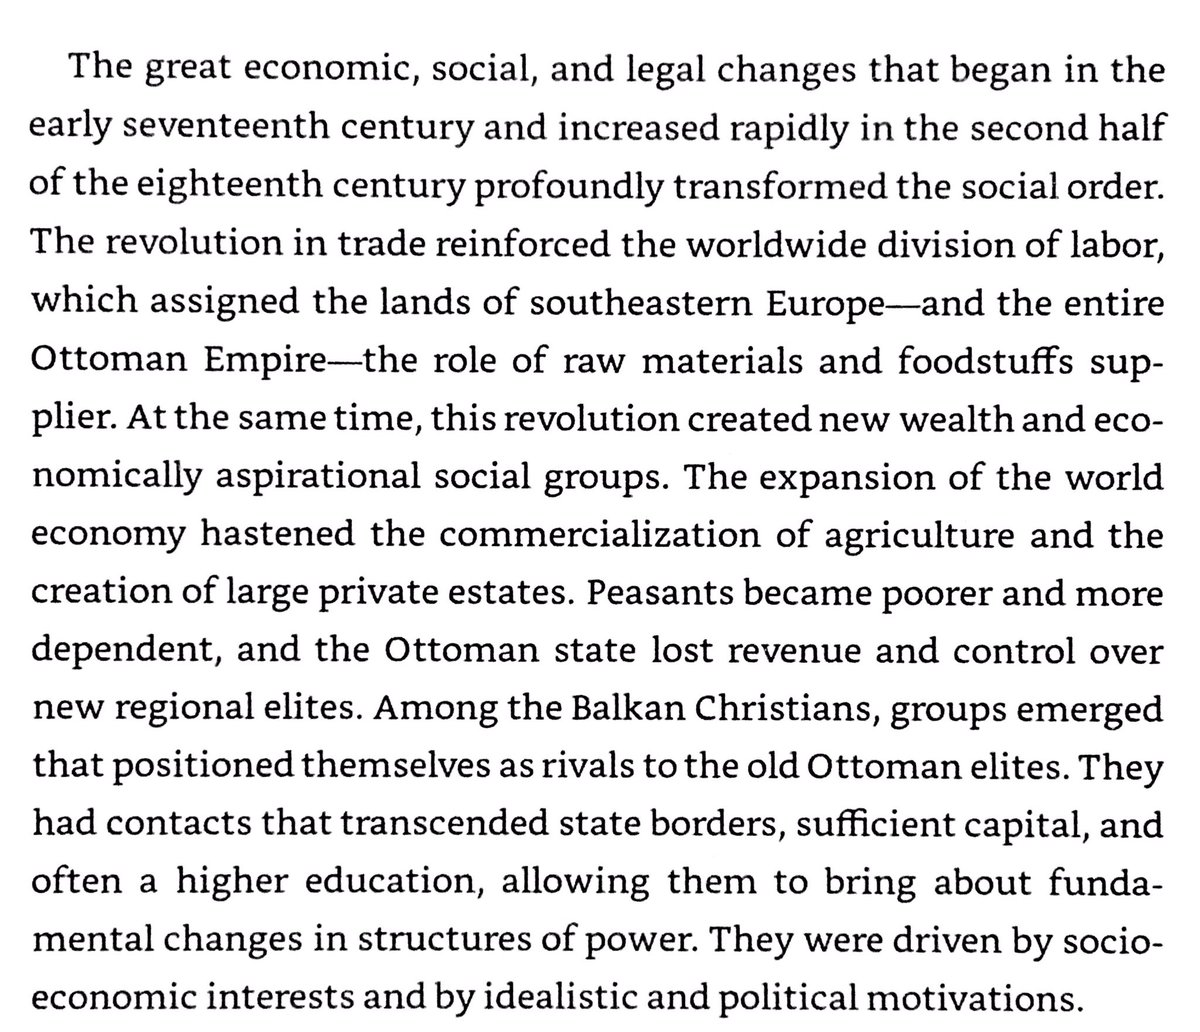 Decline of Ottoman institutions in 1700s - tax farming, unaccountable local elites, corruption, & immiseration of peasantry from commercial consolidation of land ownership. Autonomous magnates took power in Anatolia, Egypt, Syria, & Rumelia.